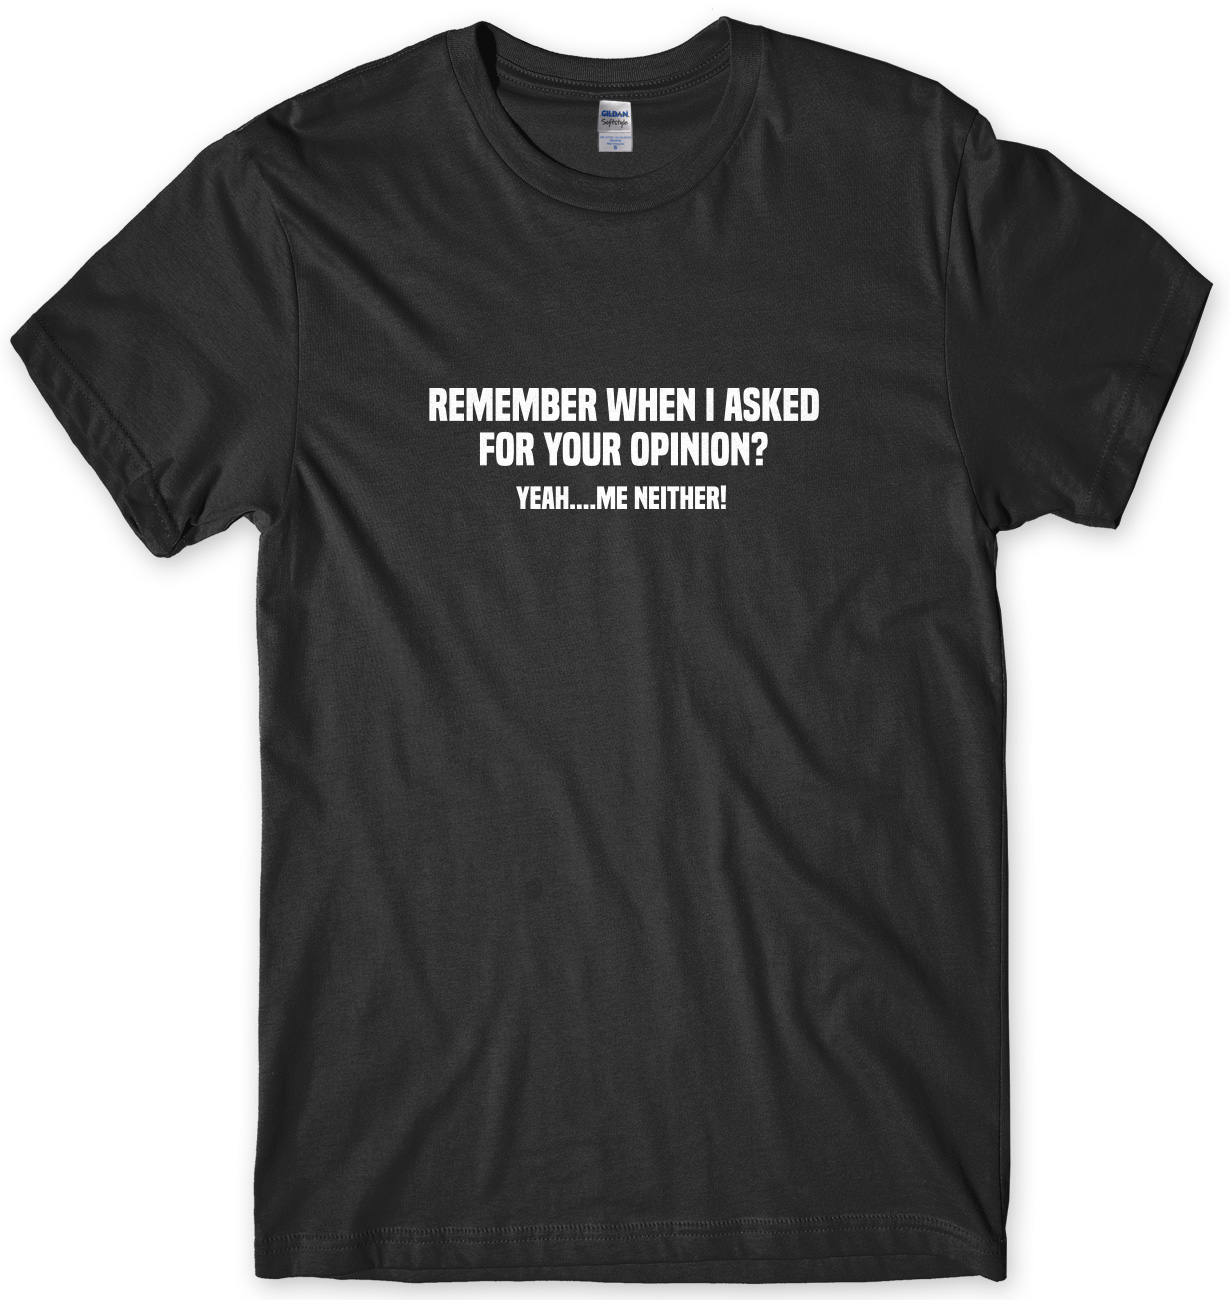 Remember When I Asked For Your Opinion? Funny Mens Unisex T-Shirt | eBay